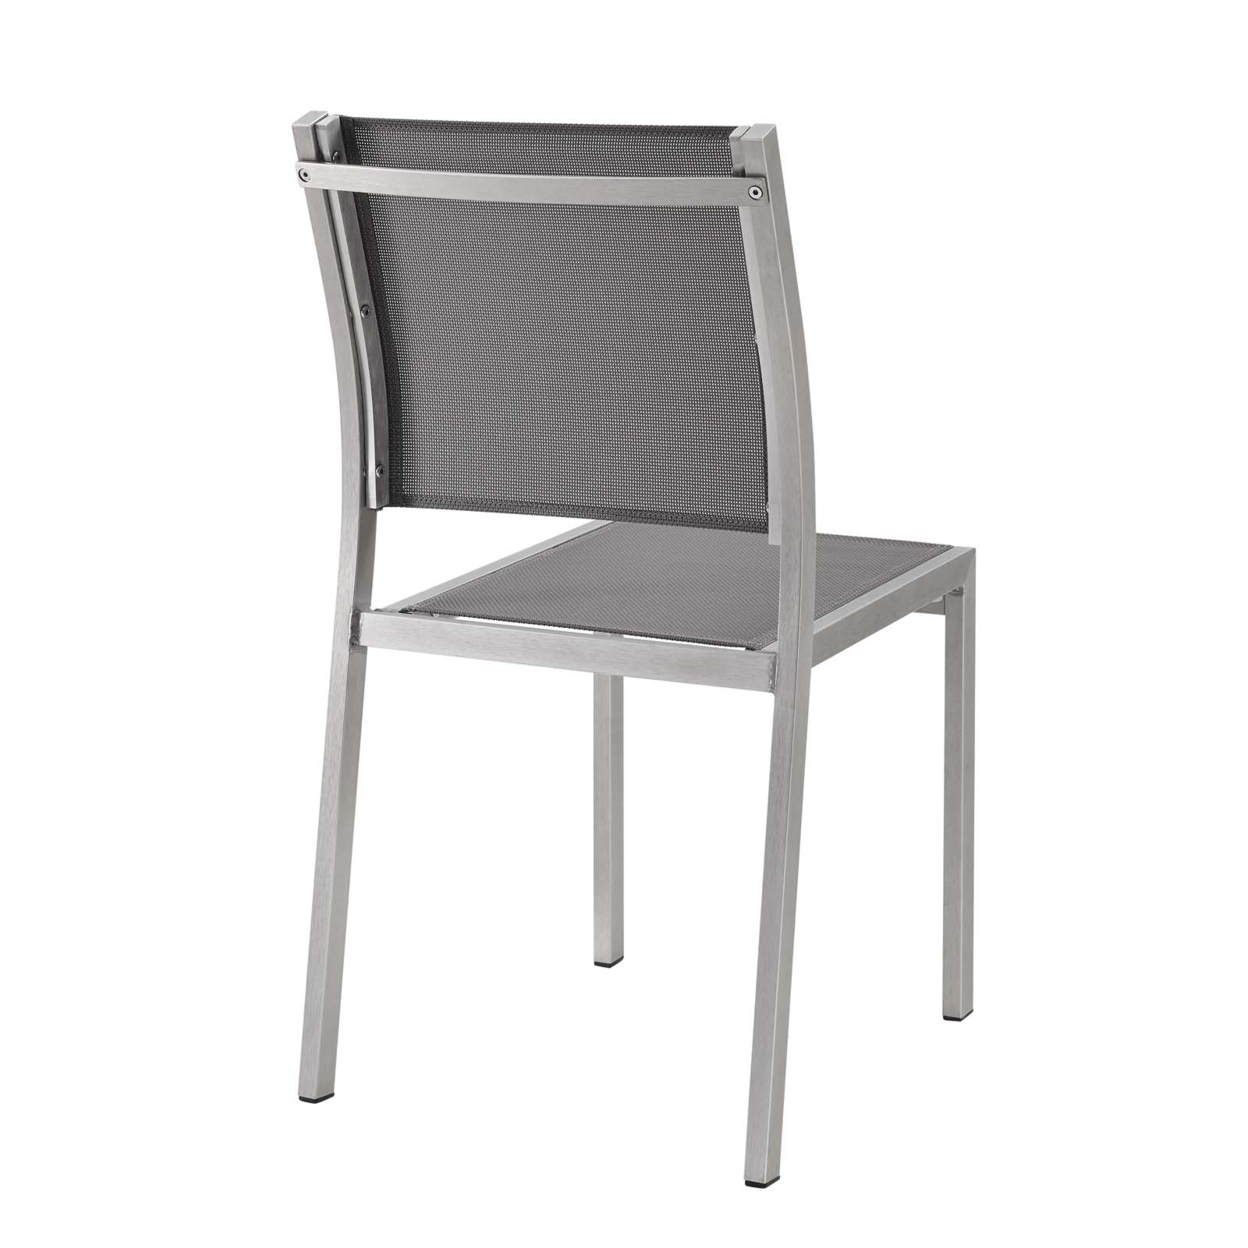 Modway Shore Fabric and Aluminum Outdoor Patio Dining Side Chair in Silver/Gray - image 3 of 4